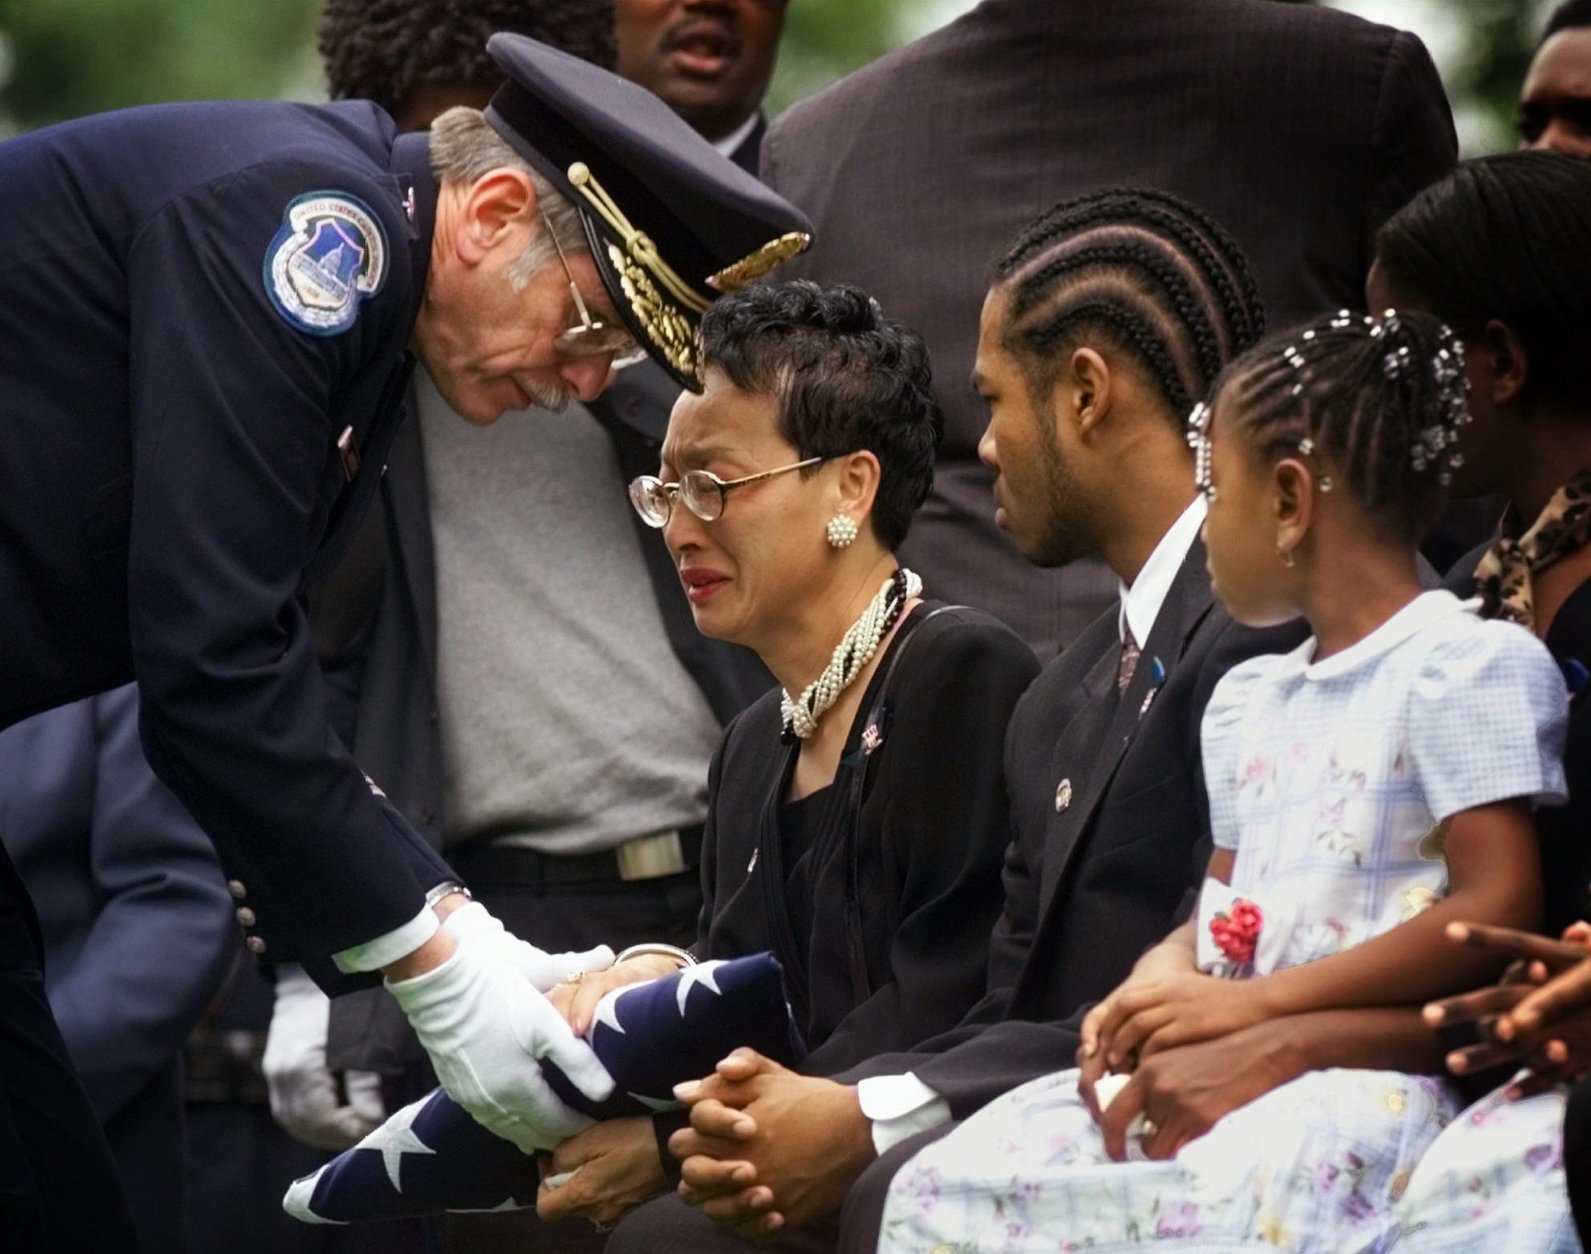 Capitol Police Chief Gary Abrecht presents the flag that draped the casket of Capitol police officer Jacob Chestnut to his widow Wendy Chestnut during funeral services at Arlington National Cemetery in Arlington, Va. Friday, July 31,1998. Chestnut, along with fellow officer John Gibson were shot and killed last week when a gunman burst through a security barrier on Capitol Hill. (AP Photo/Doug Mills)